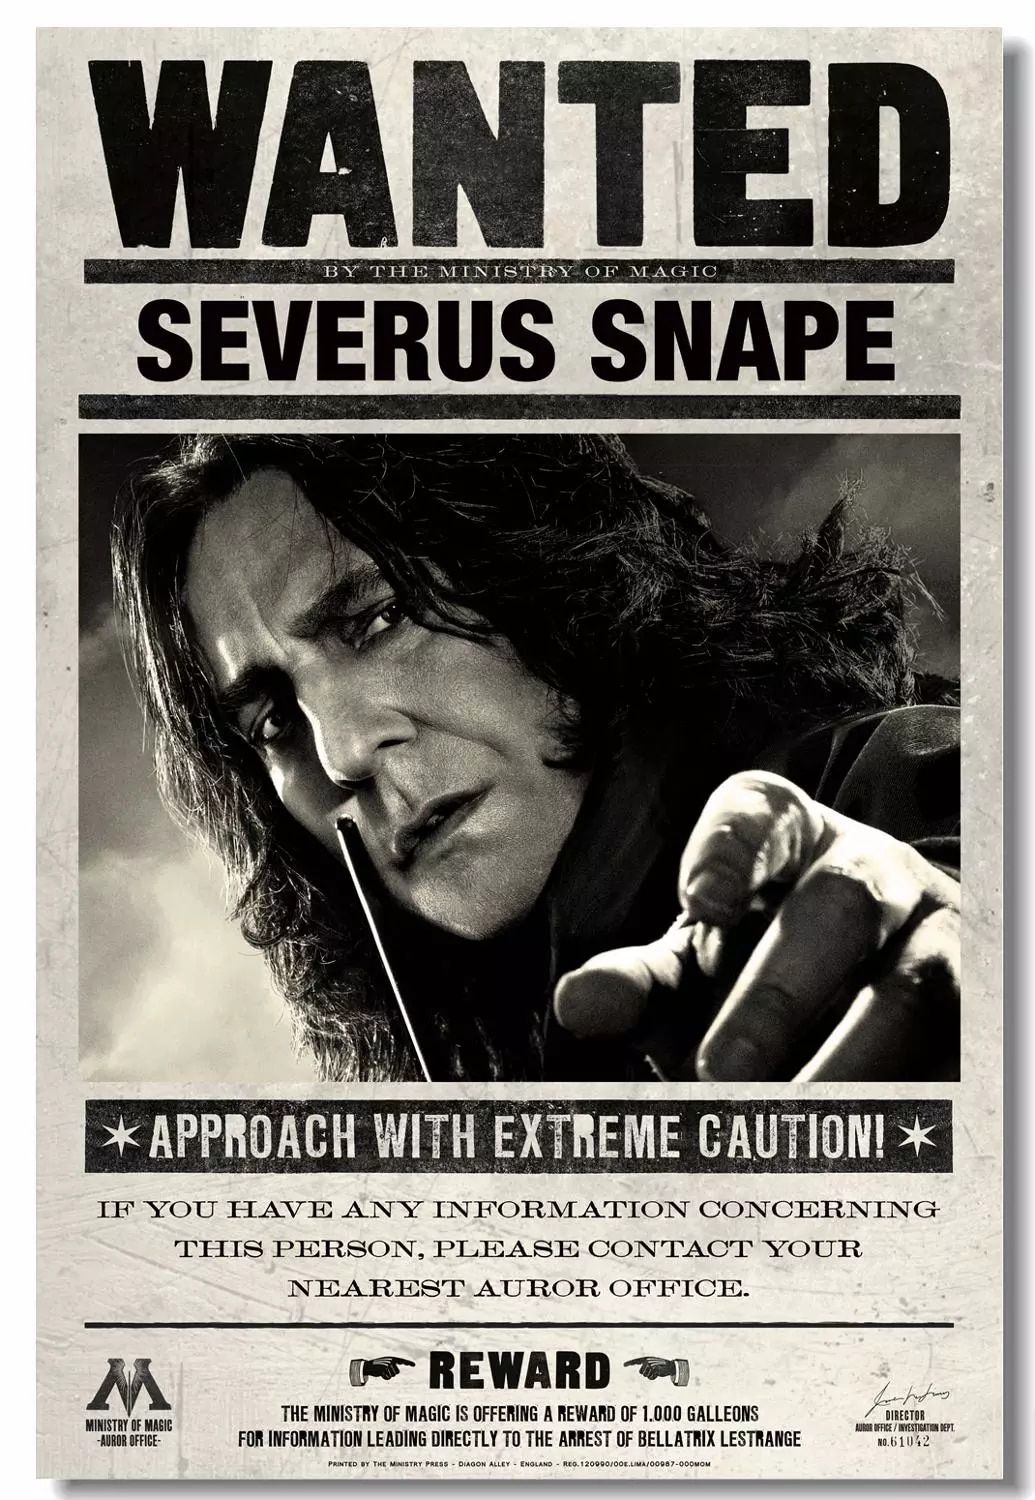 Custom Canvas Wall Prints Vintage Wanted Severus Snape Poster Bellatrix Lestrange Wall Stickers Daily Prophet Wallpaper #. Wall Stickers